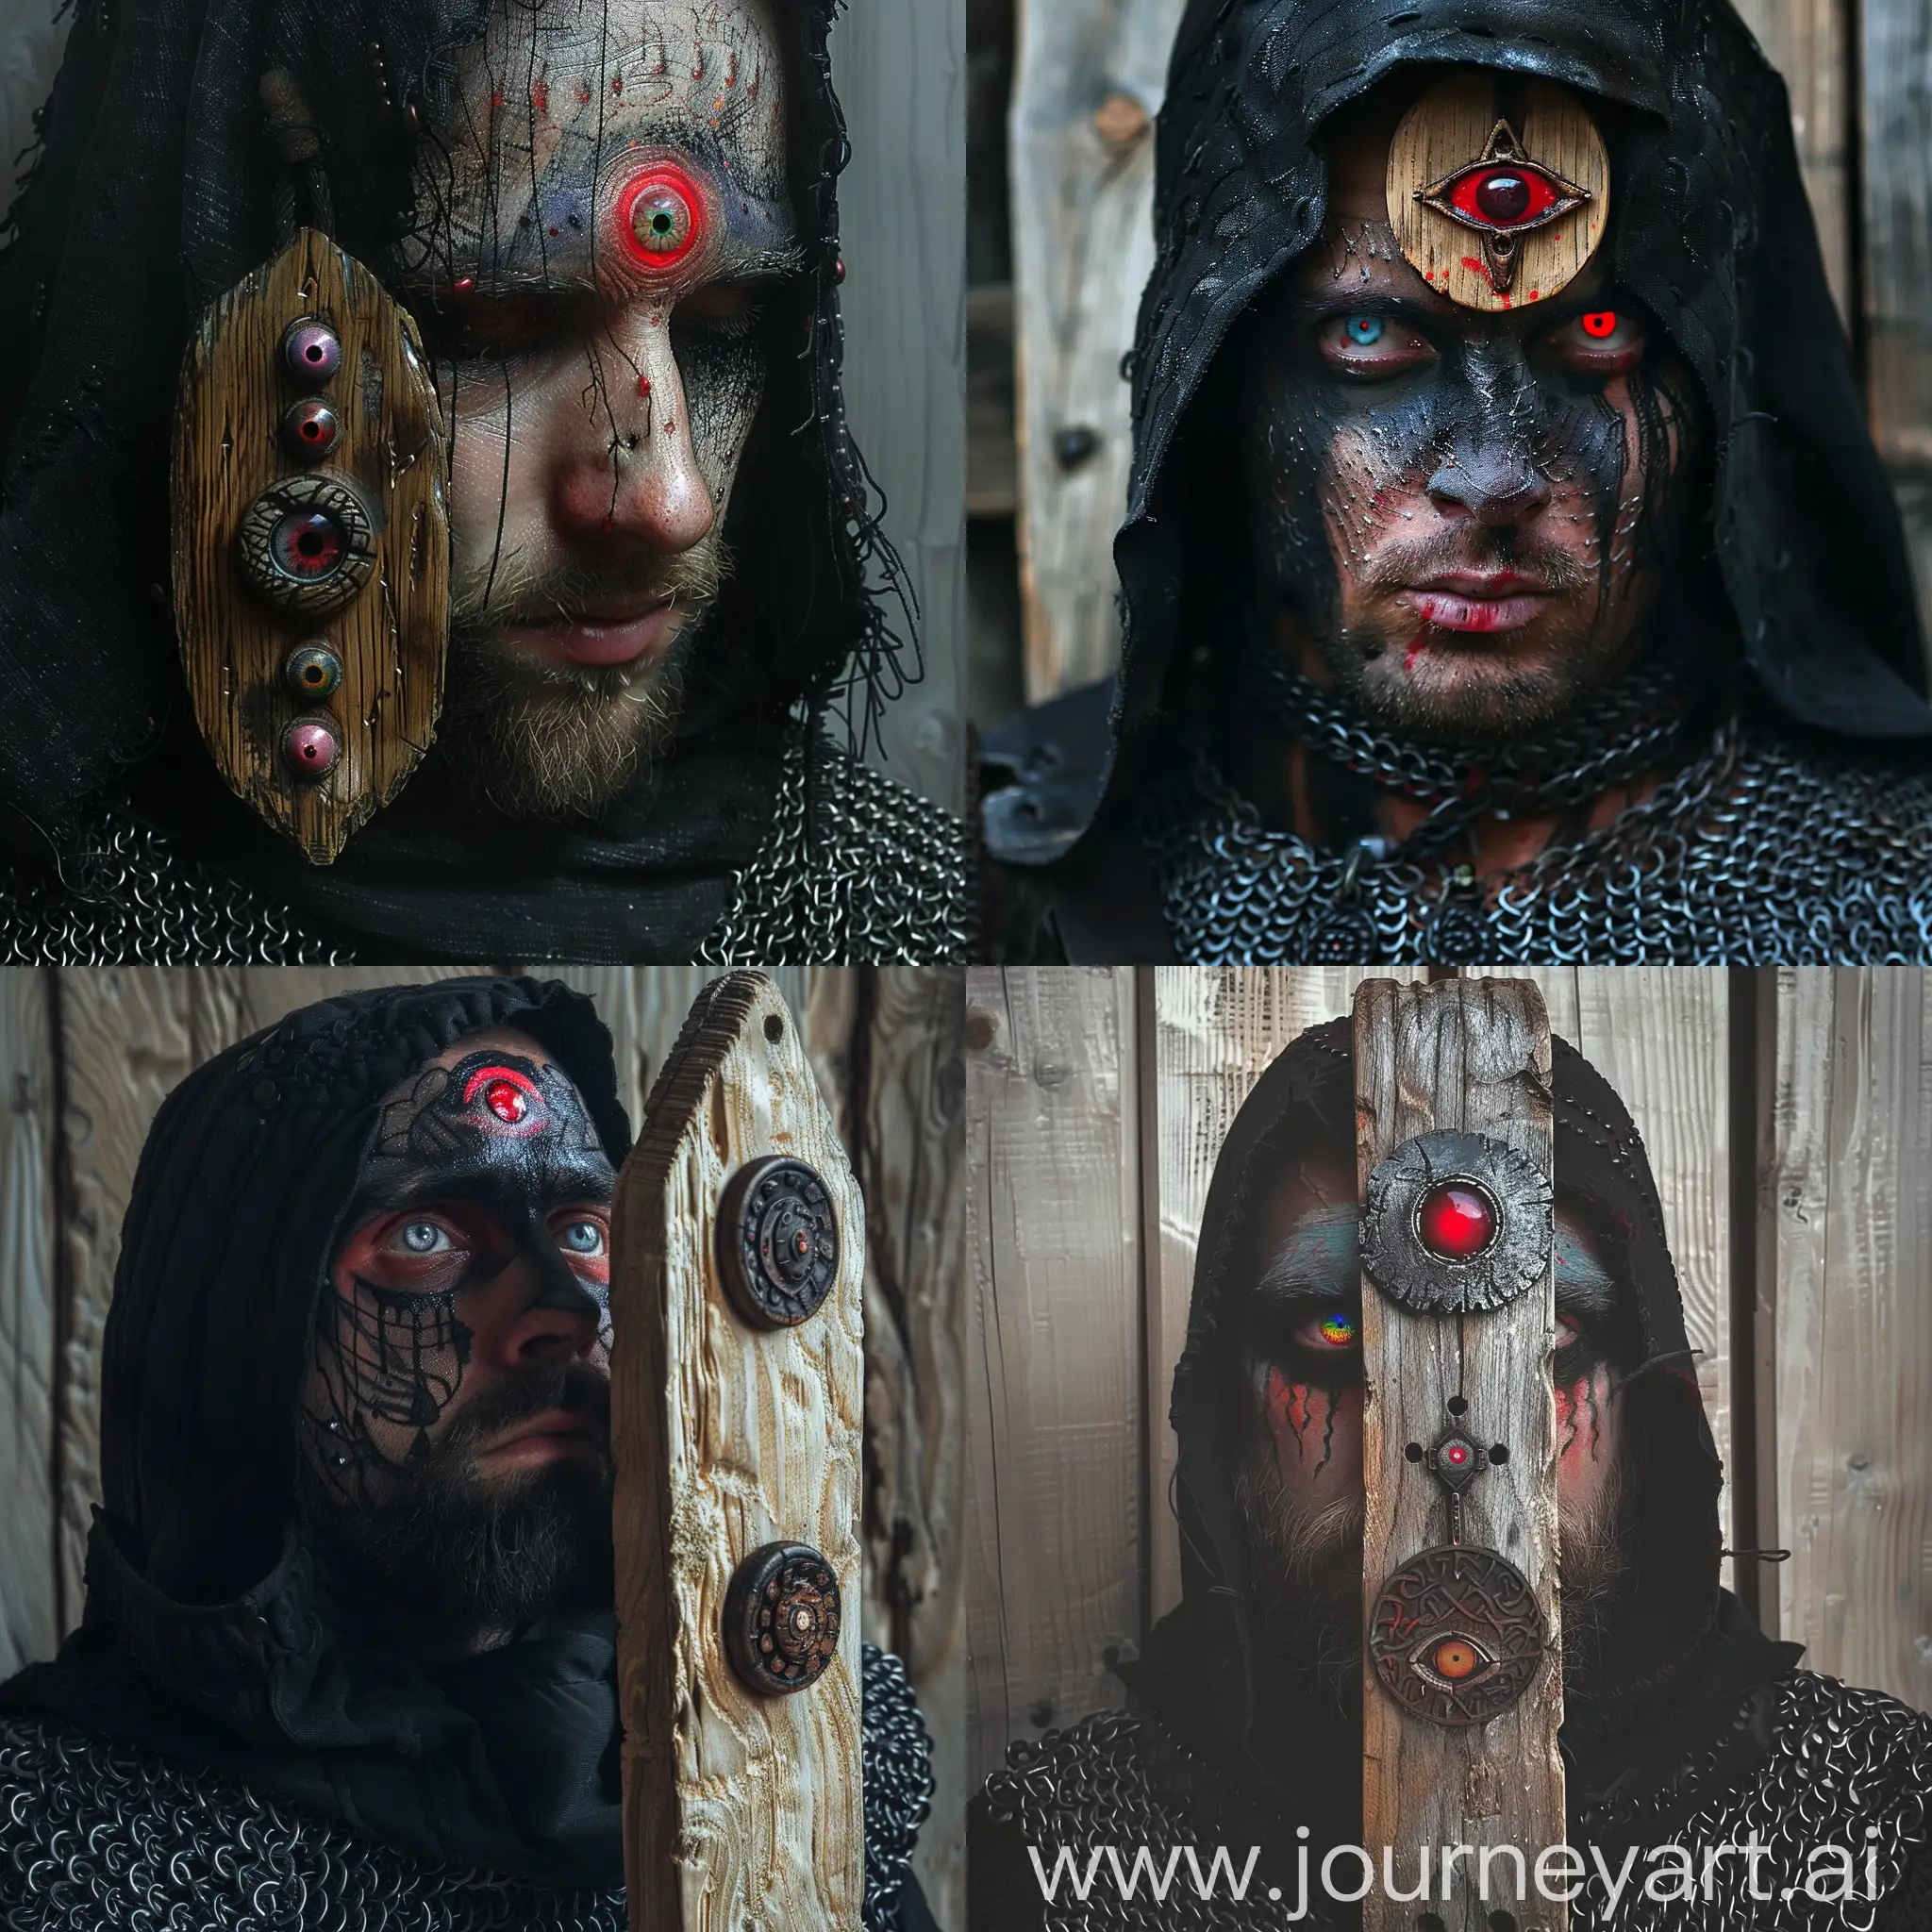 The guy with the red eye painted on his forehead, chainmail, black hood. wooden amulet with red eye, painted colored eyes on face. art